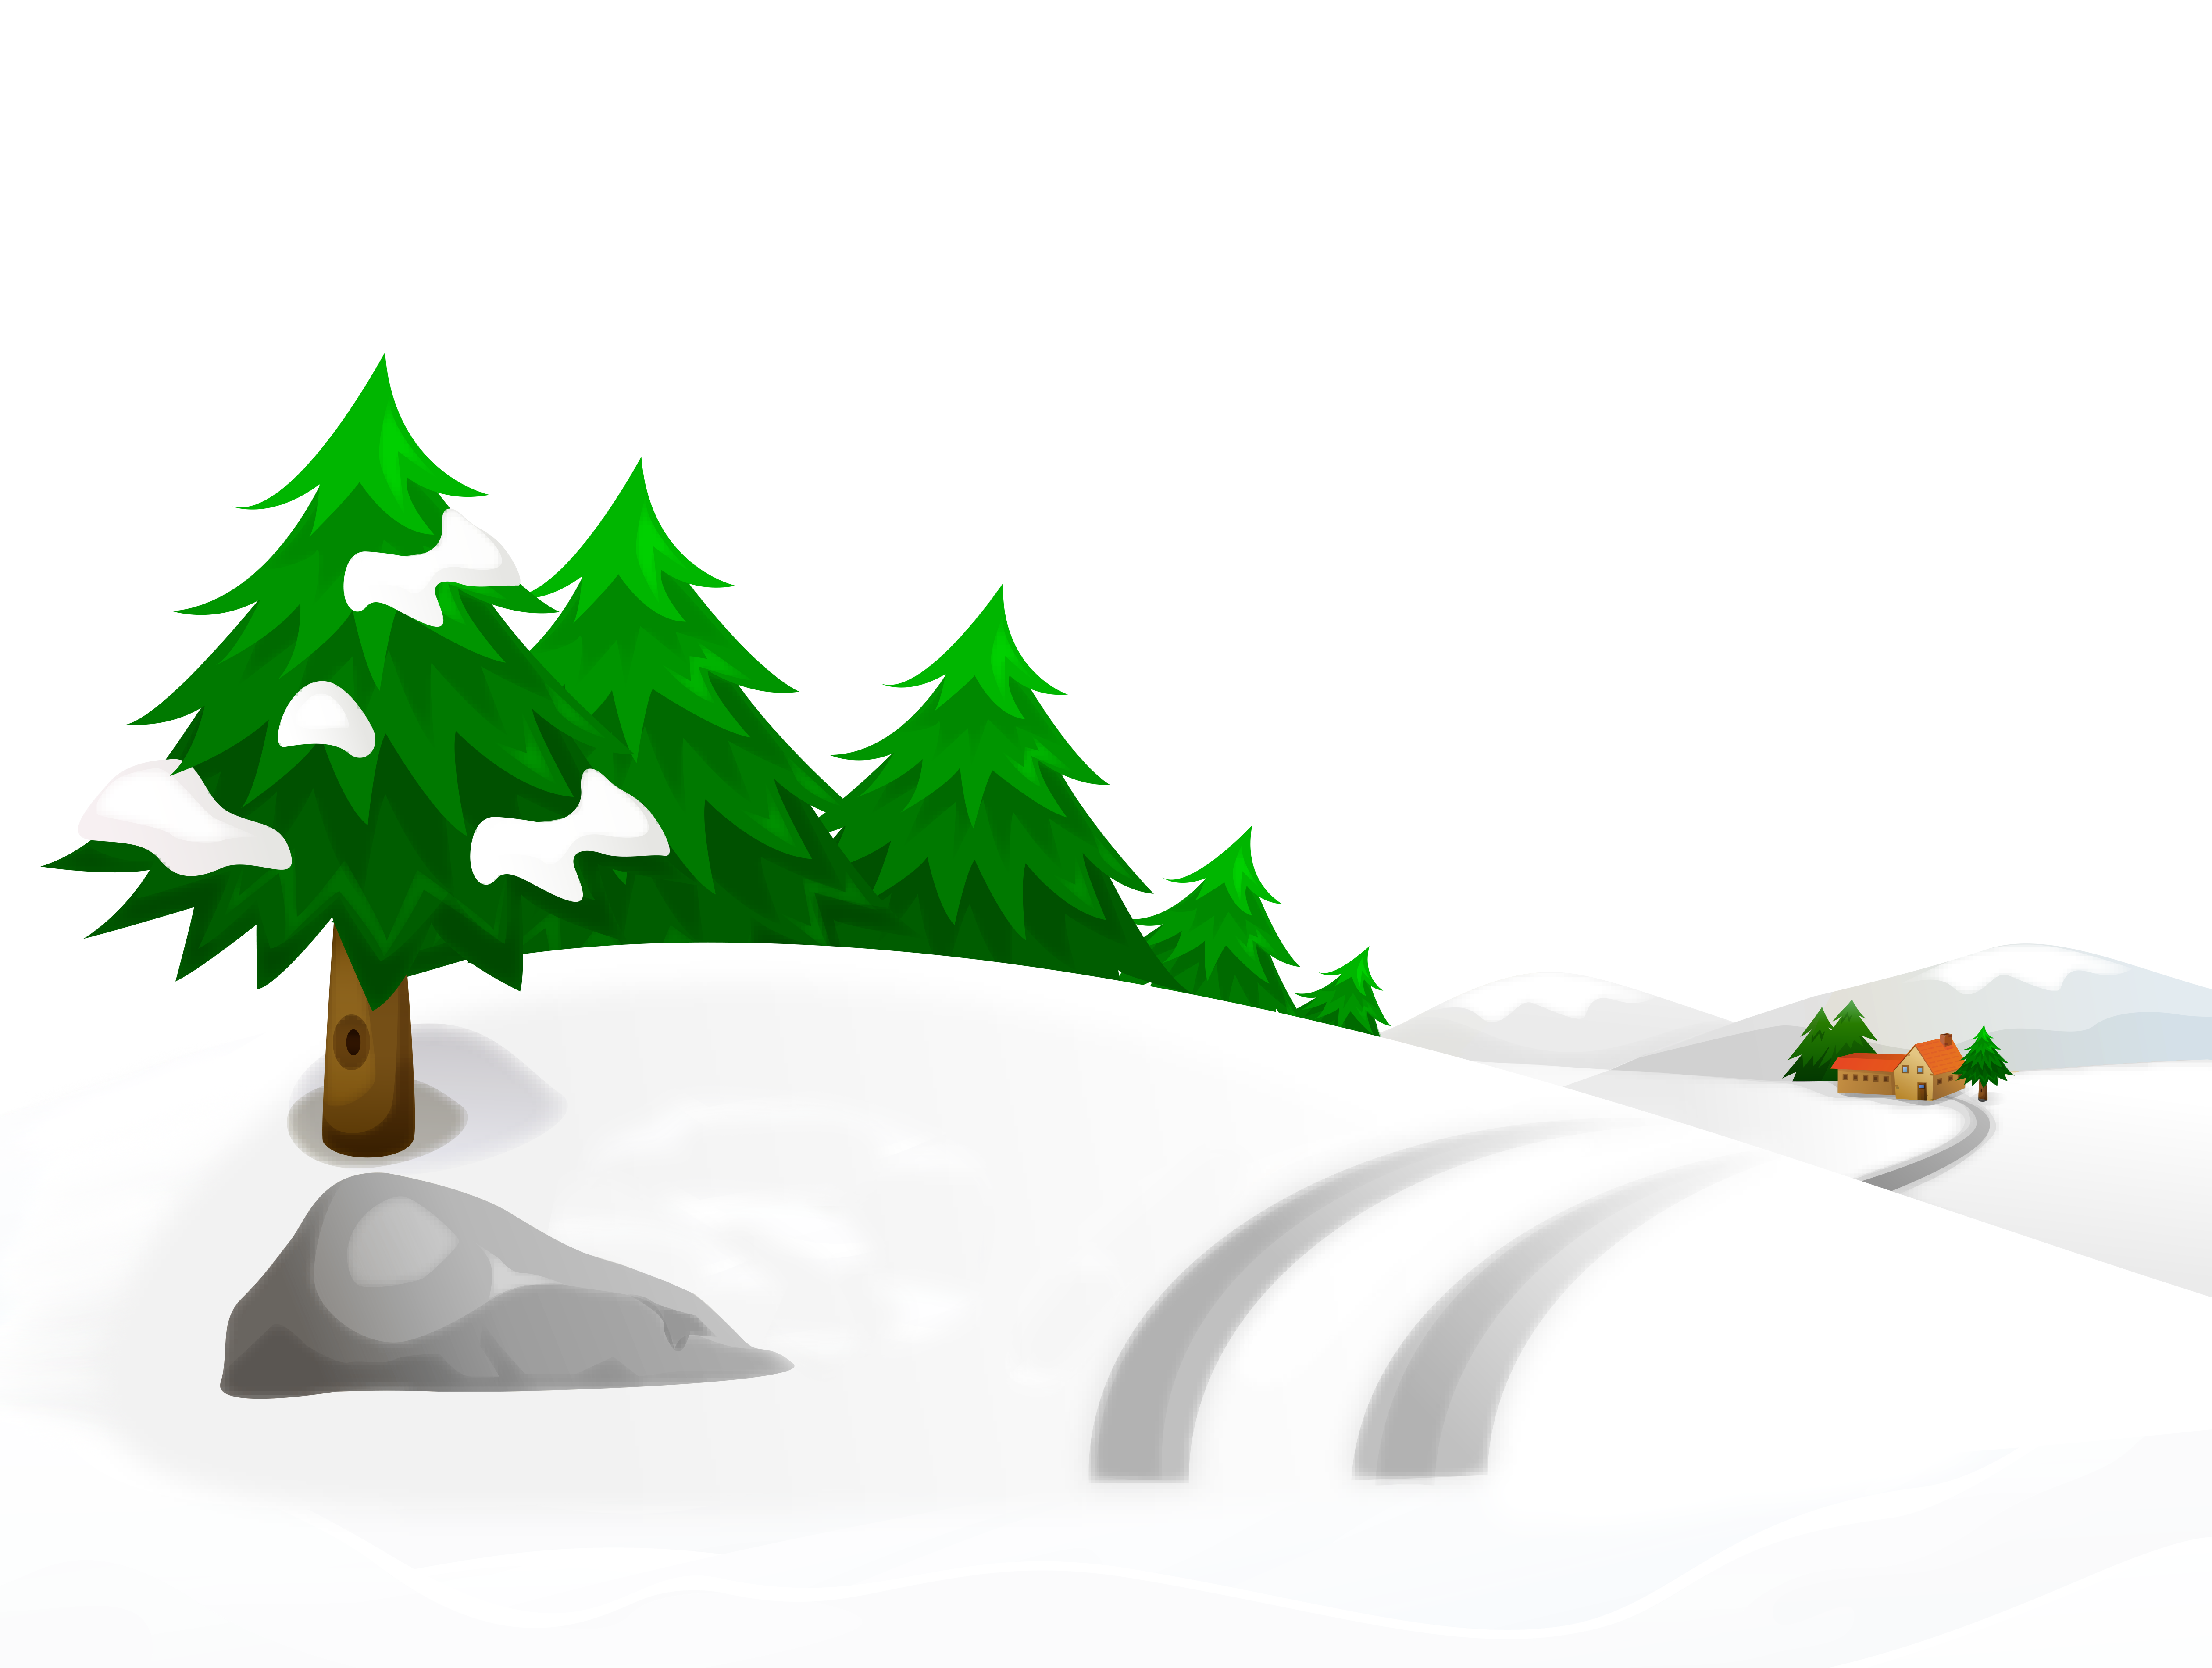 Ground clipart snowy. Winter with trees and